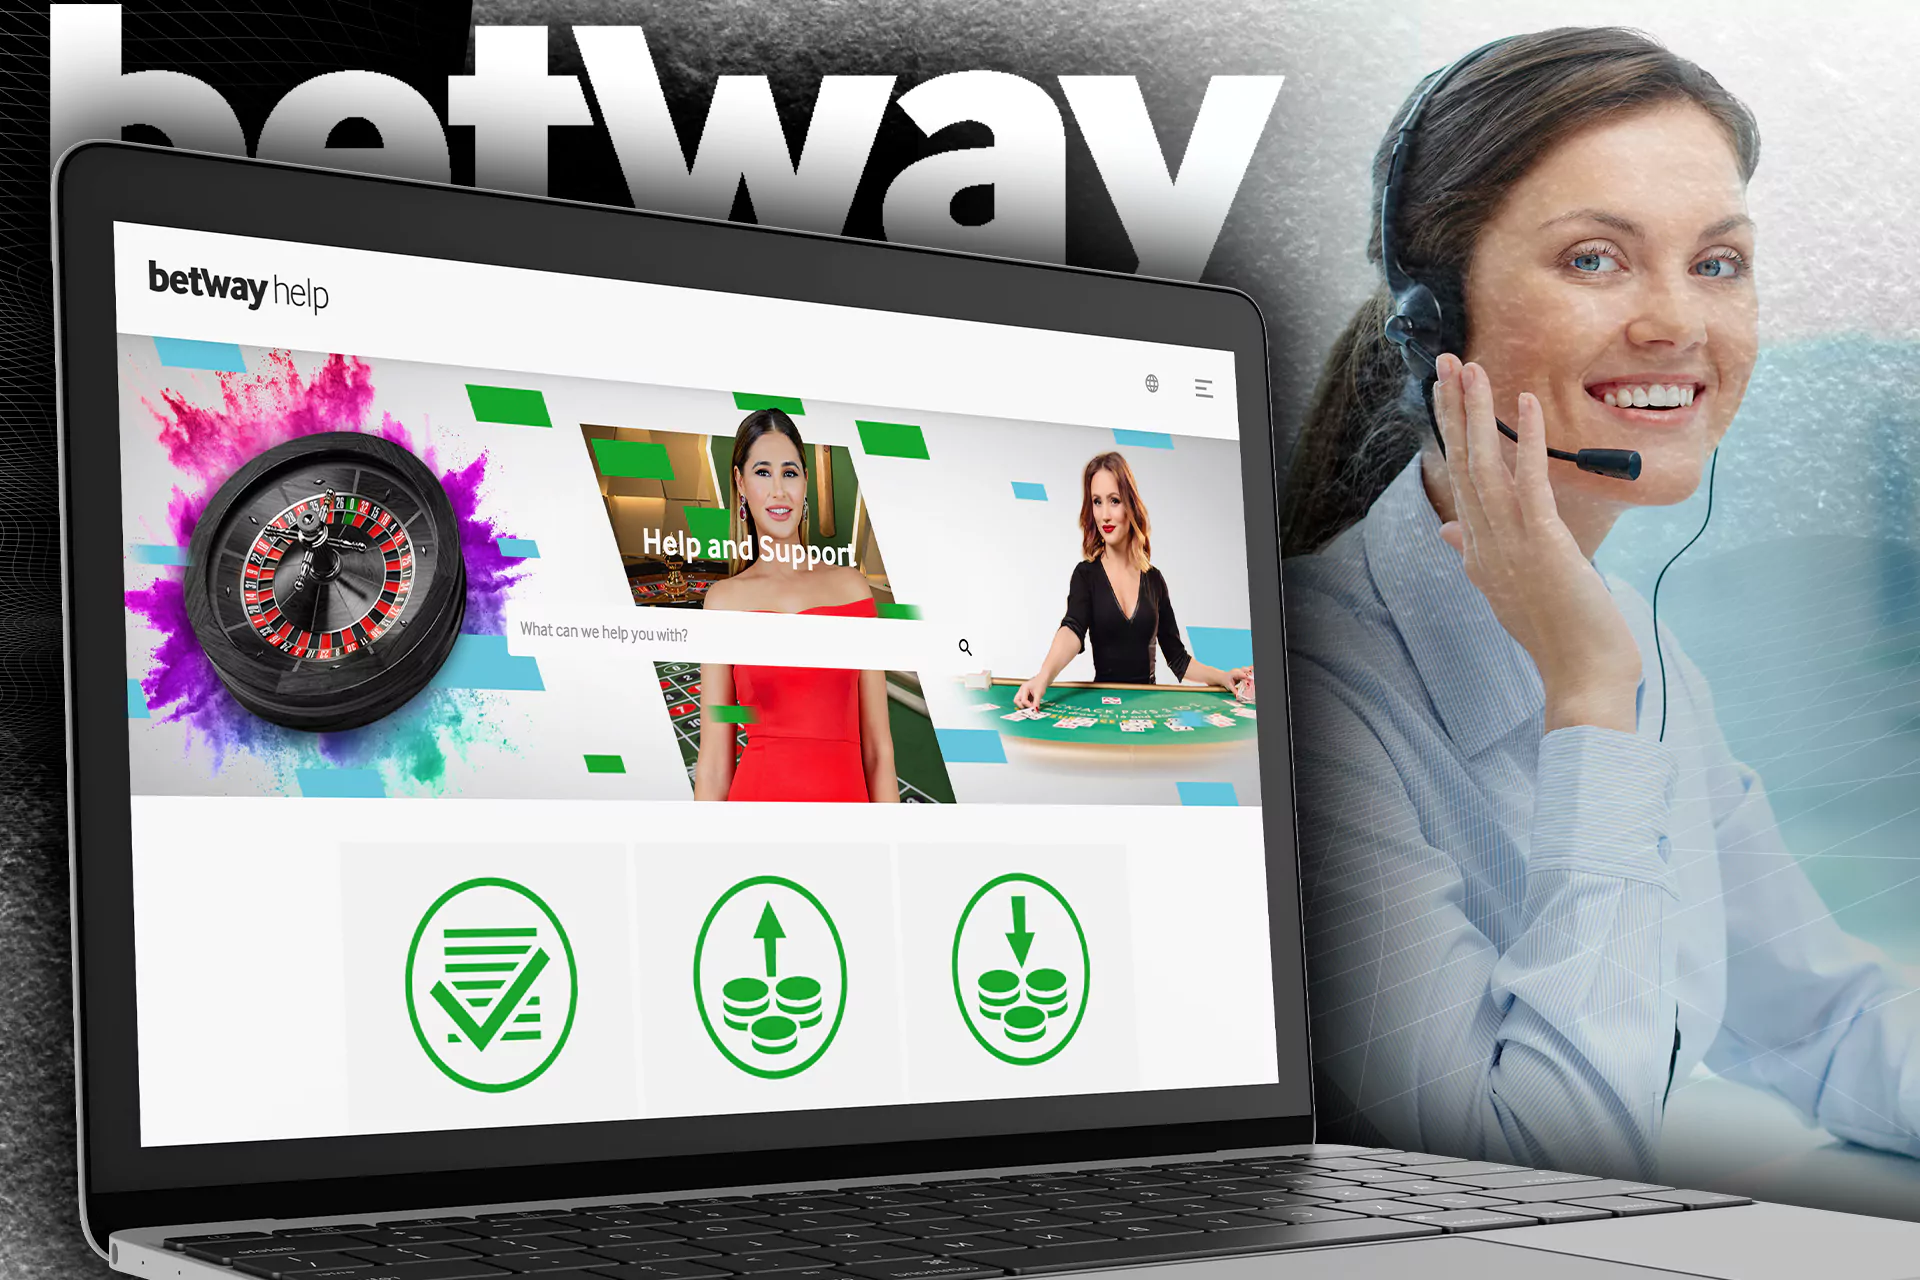 Contact the Betway support team in case of any questions.